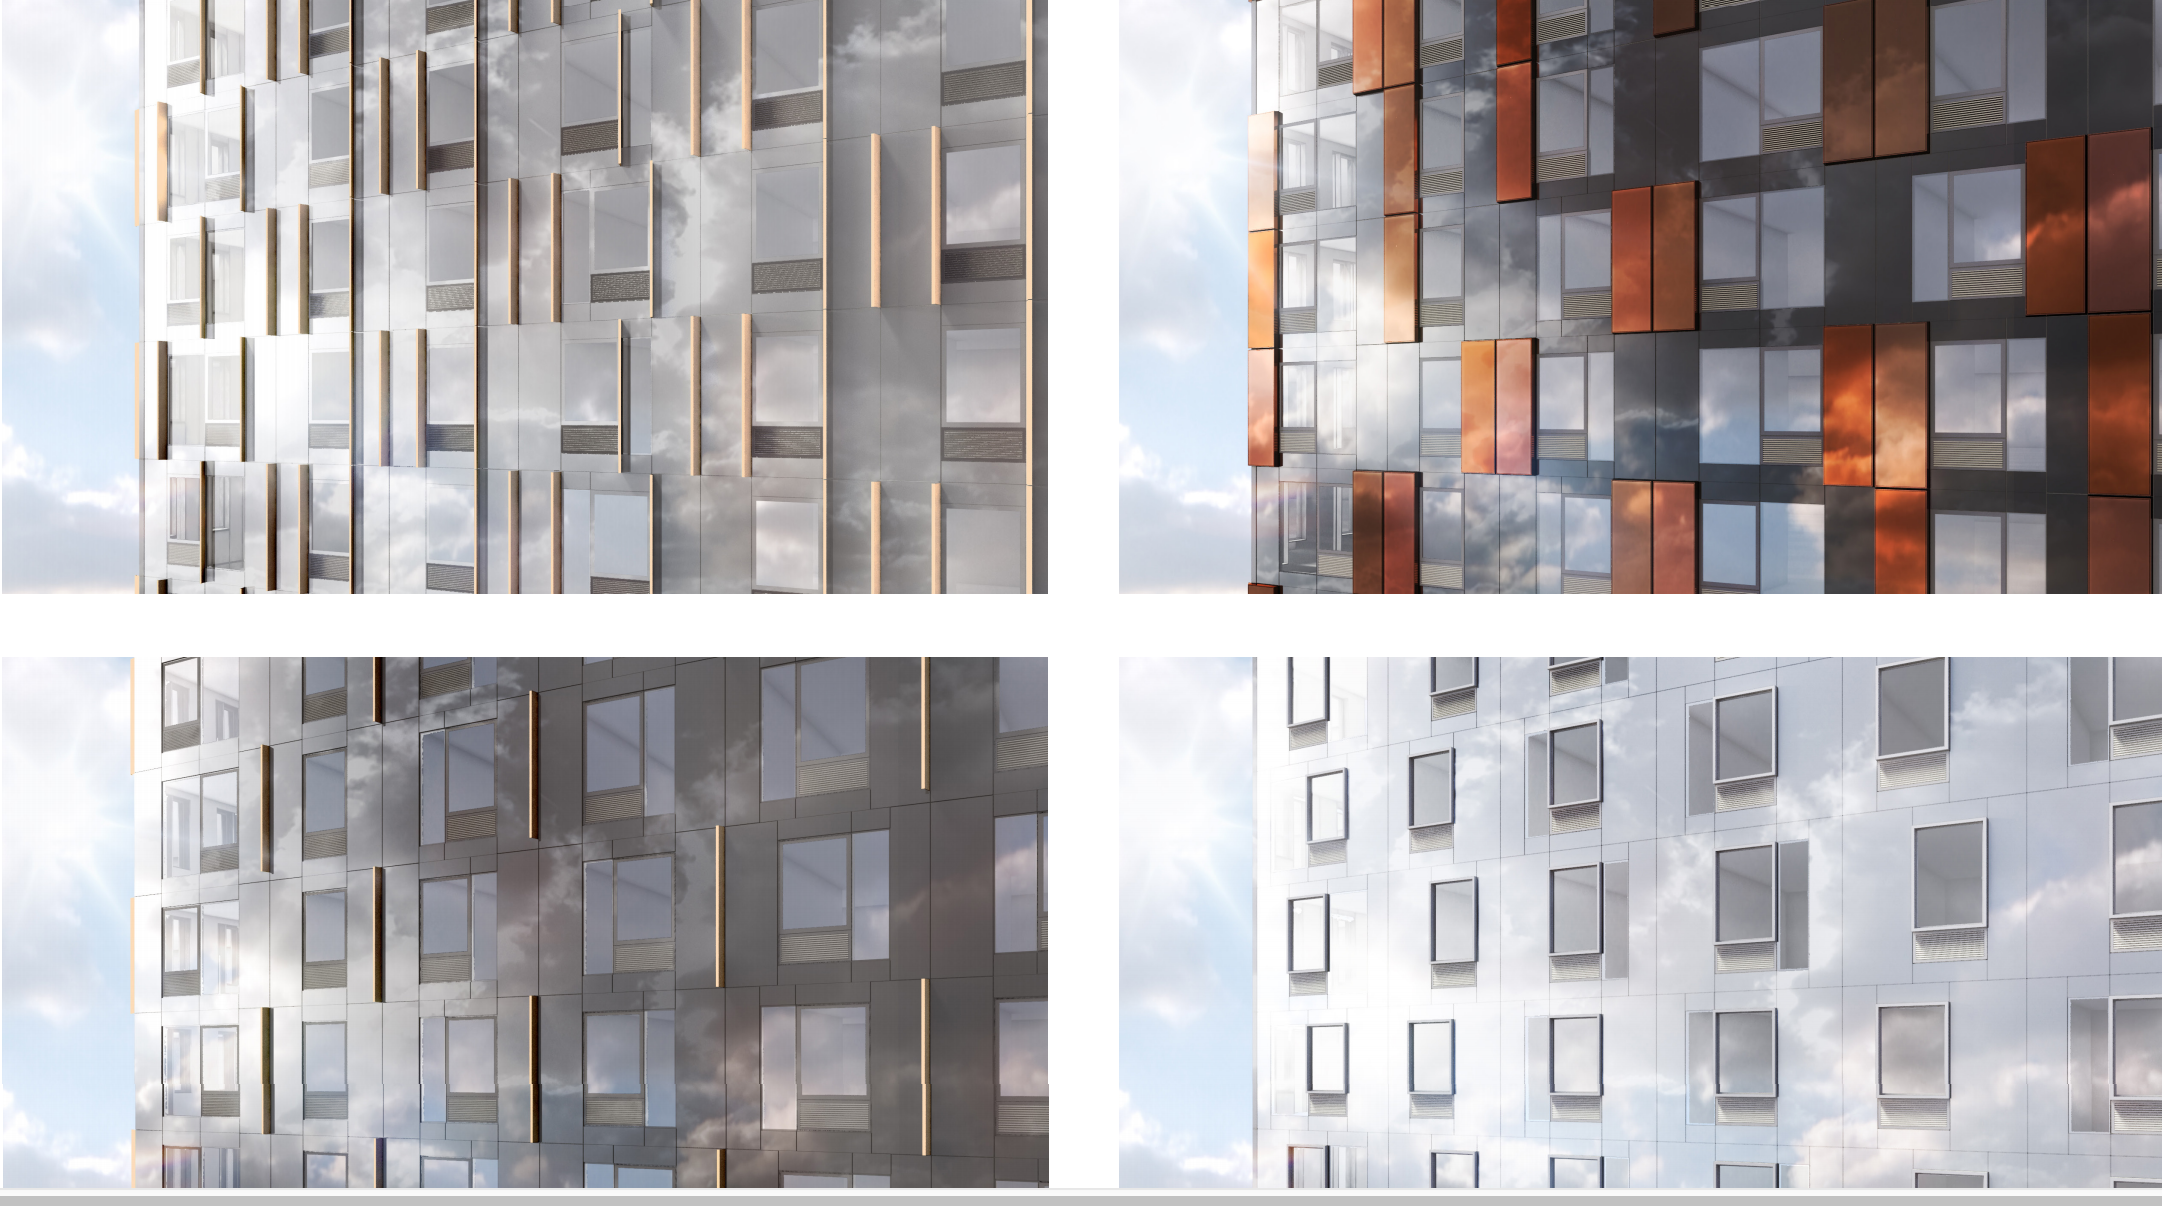 38 Sixth Avenue facade, rendering by SHoP Architects